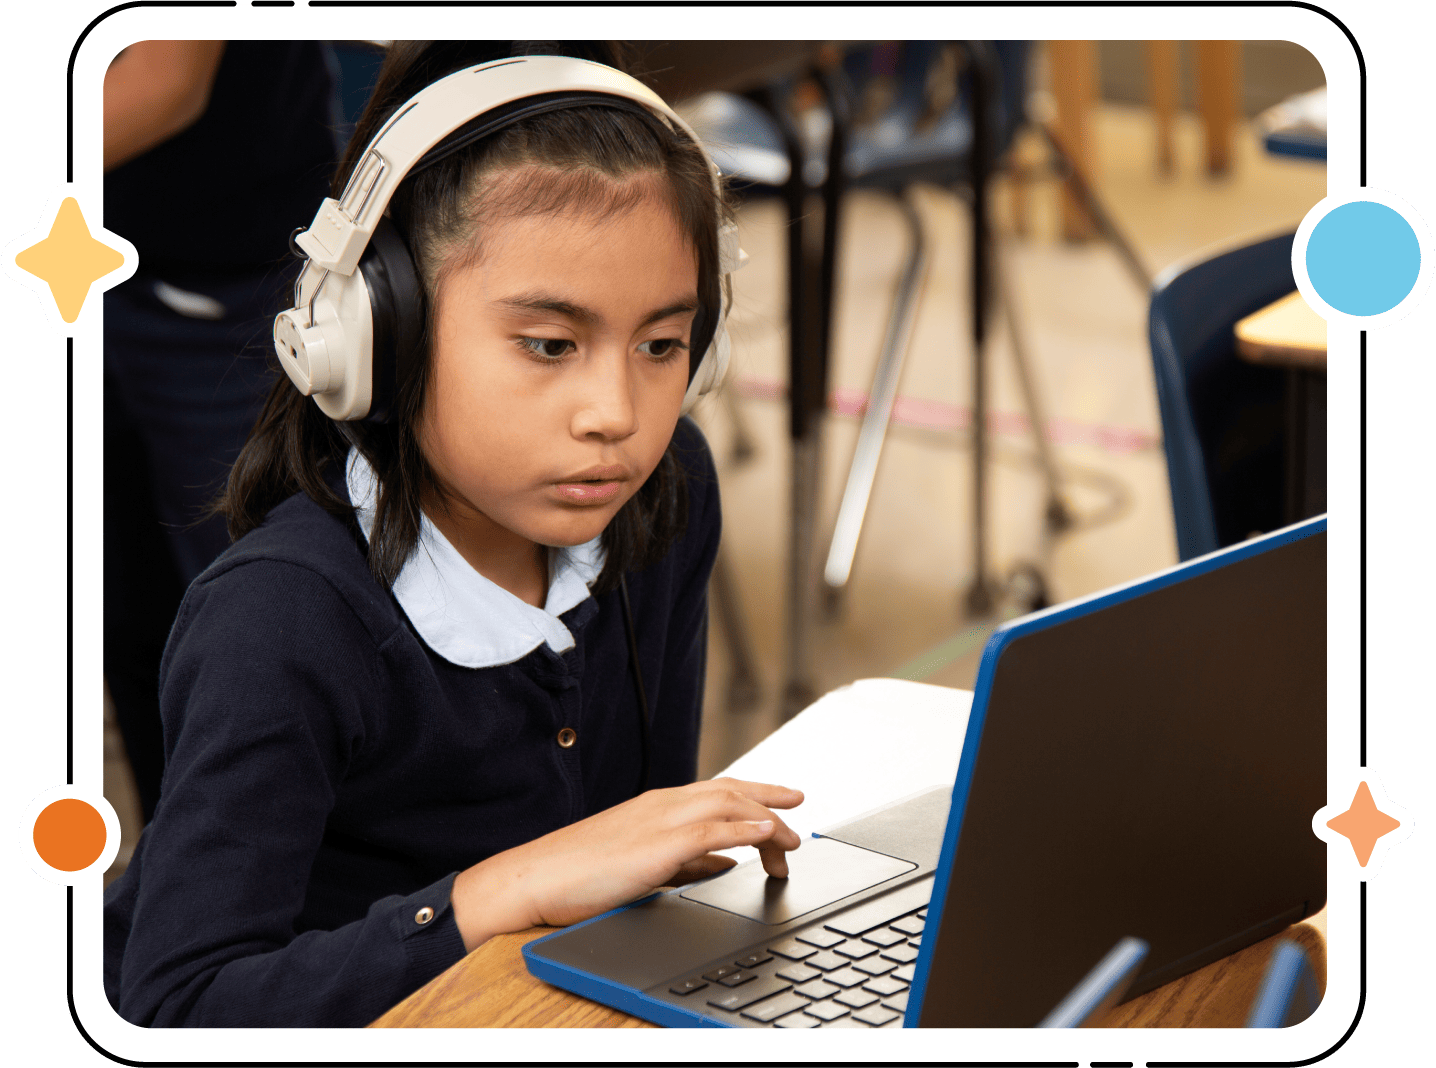 A young student wearing headphones uses a laptop in a classroom setting, focusing intently on her screen as part of a biliteracy program.